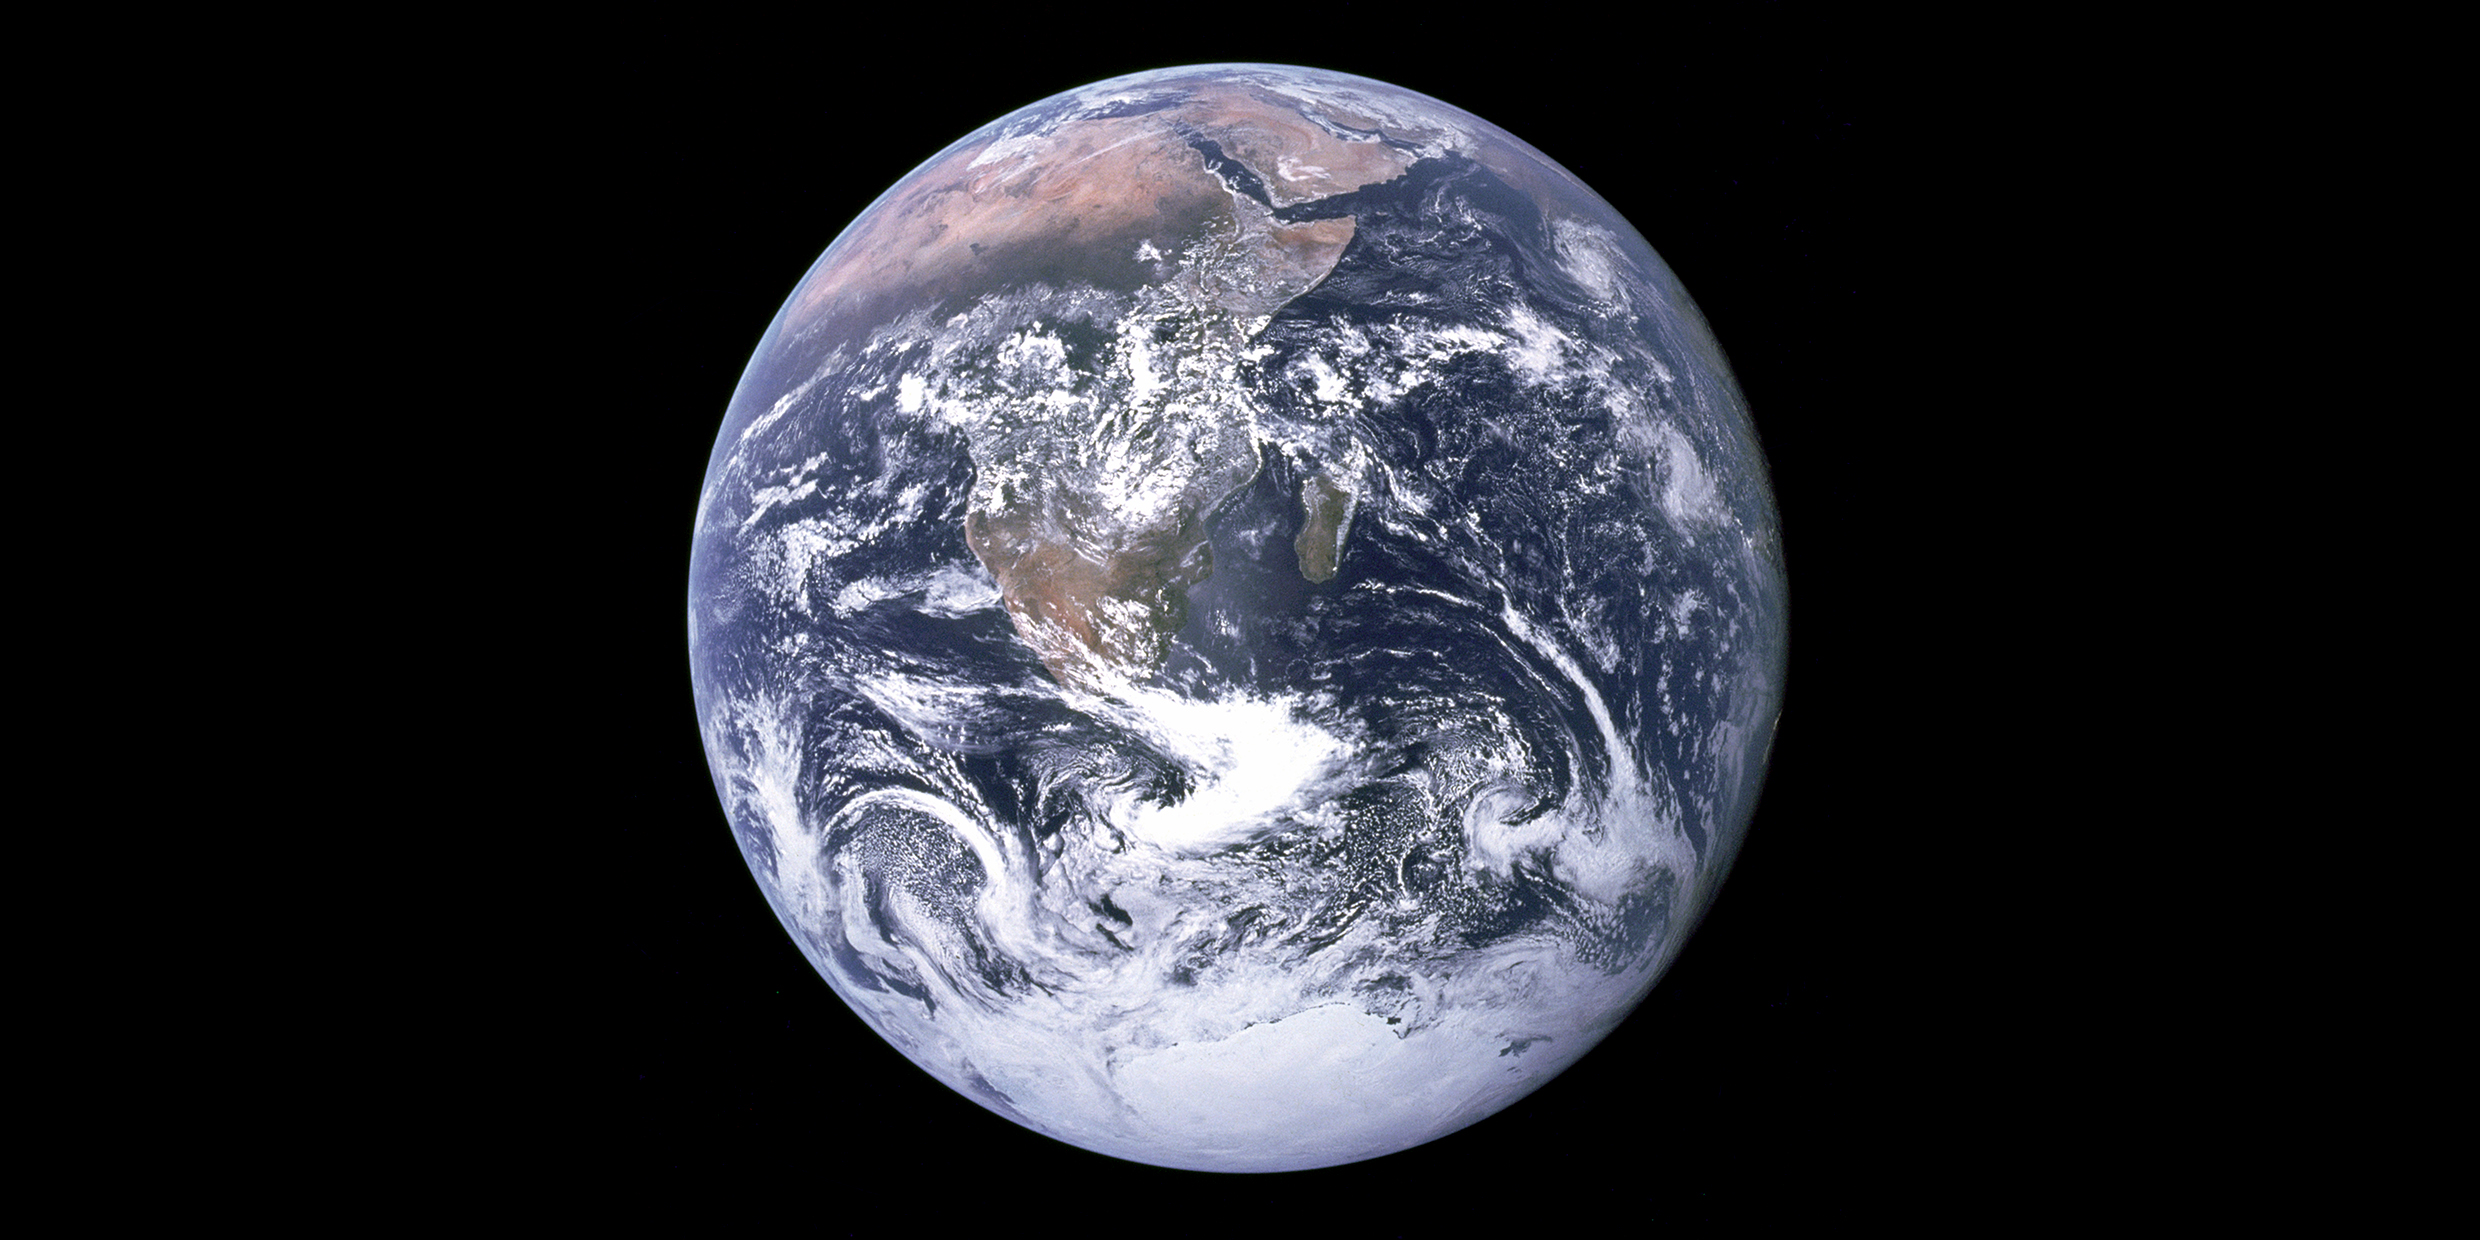 Image of the Earth from space